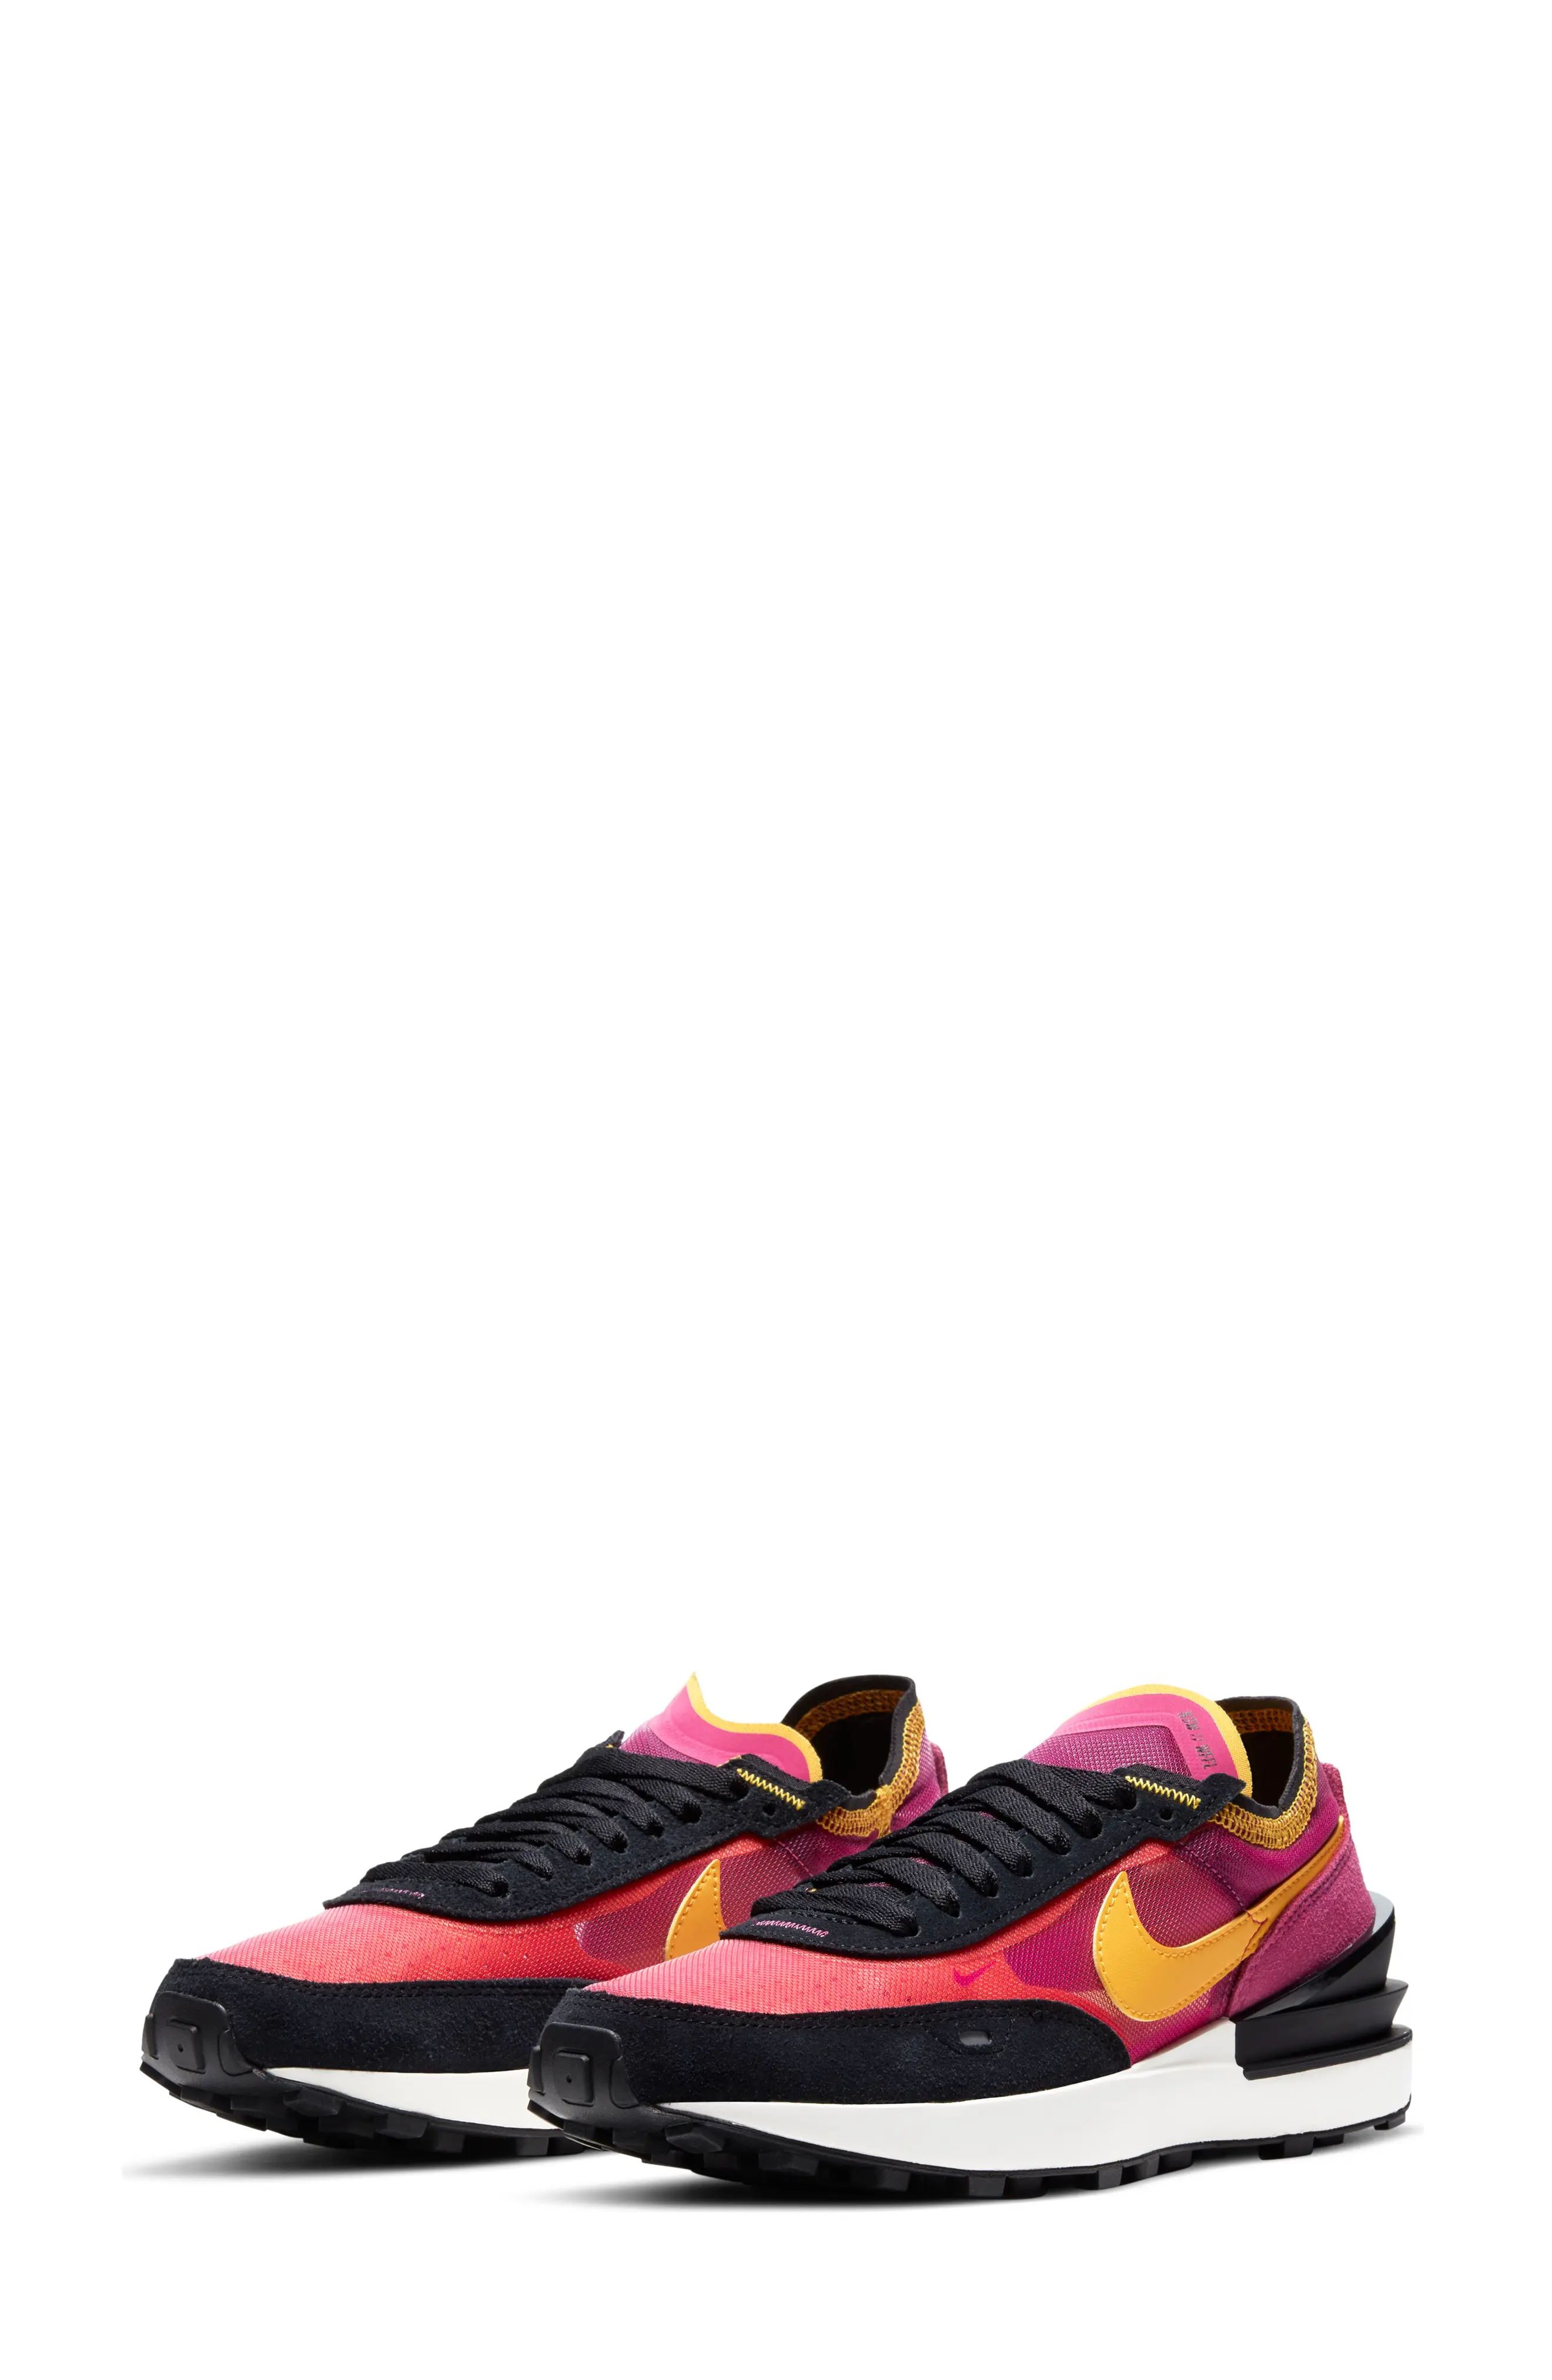 Nike Waffle One Sneaker, Size 10 in Active Fuchsia/Gold/Black at Nordstrom | Nordstrom